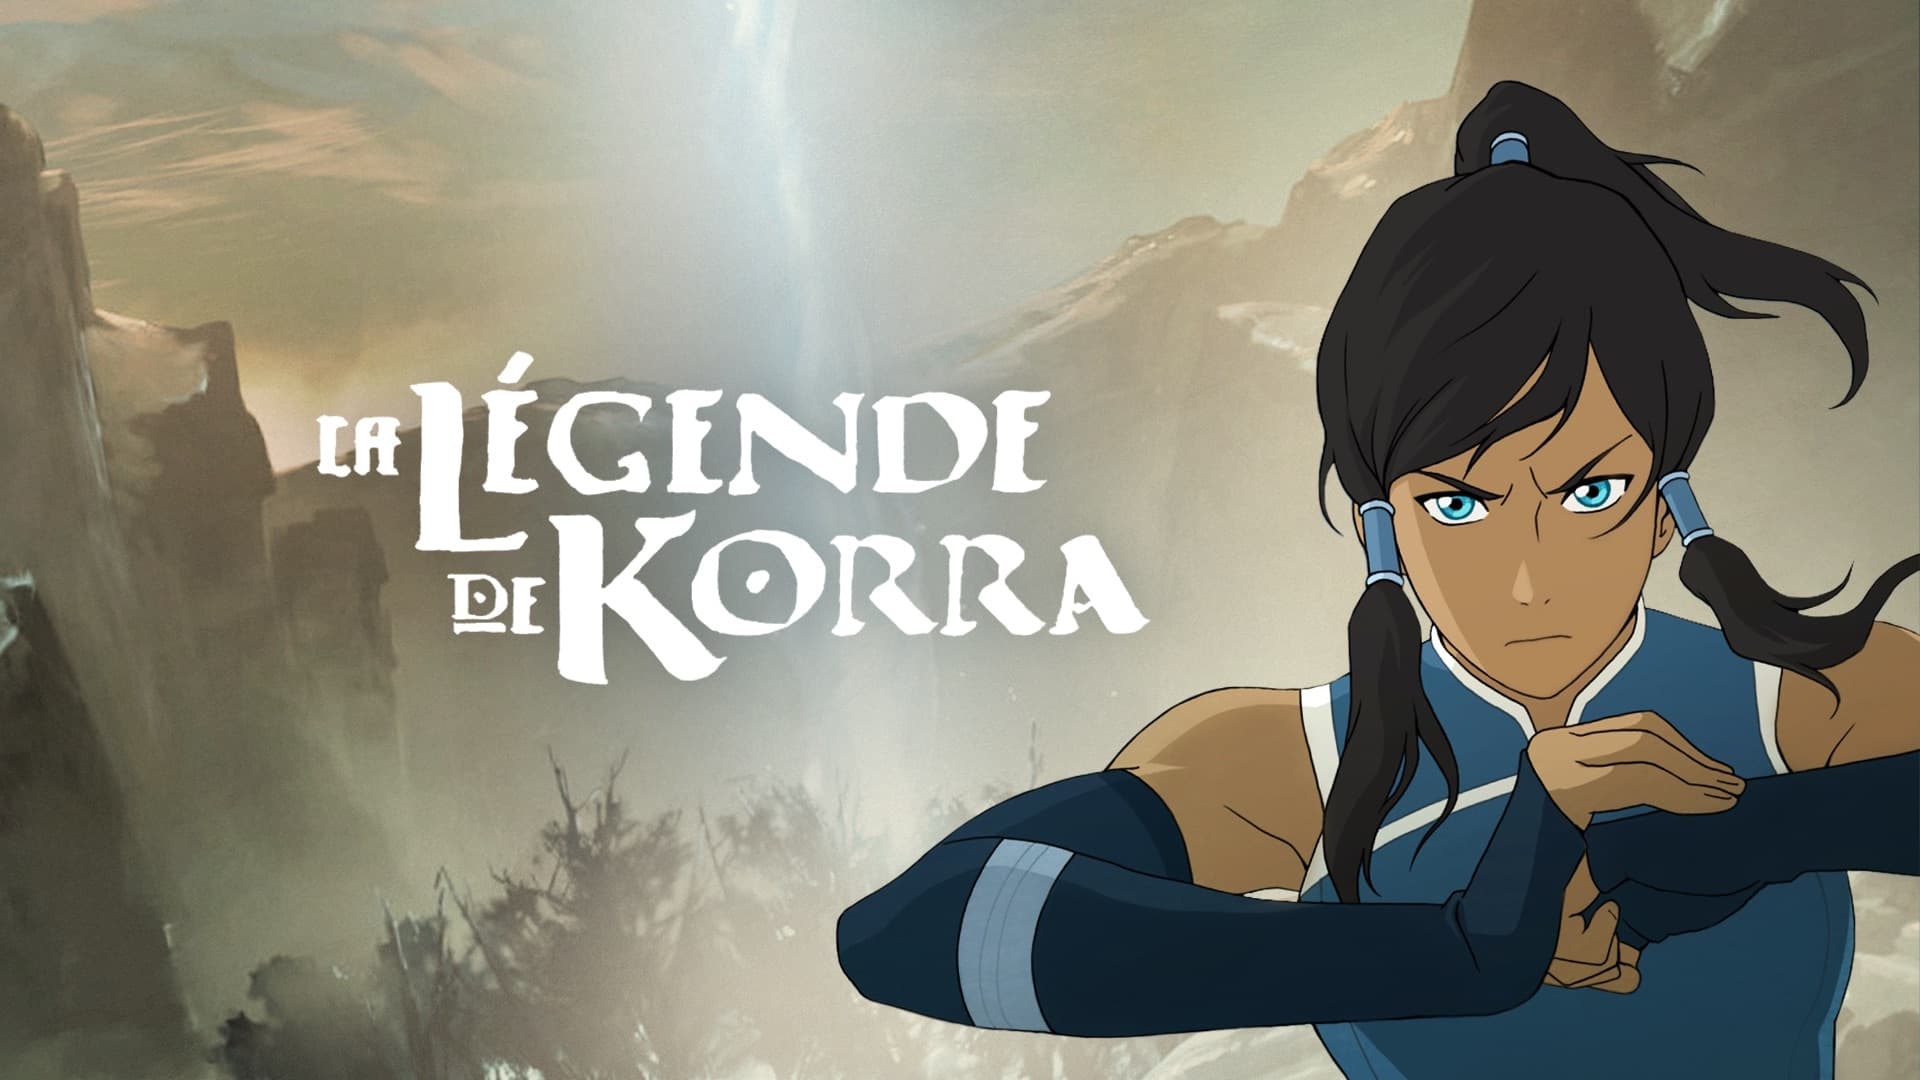 Netflix To Release The Witcher Anime Made By The Legend of Korra Studio |  Geek Culture